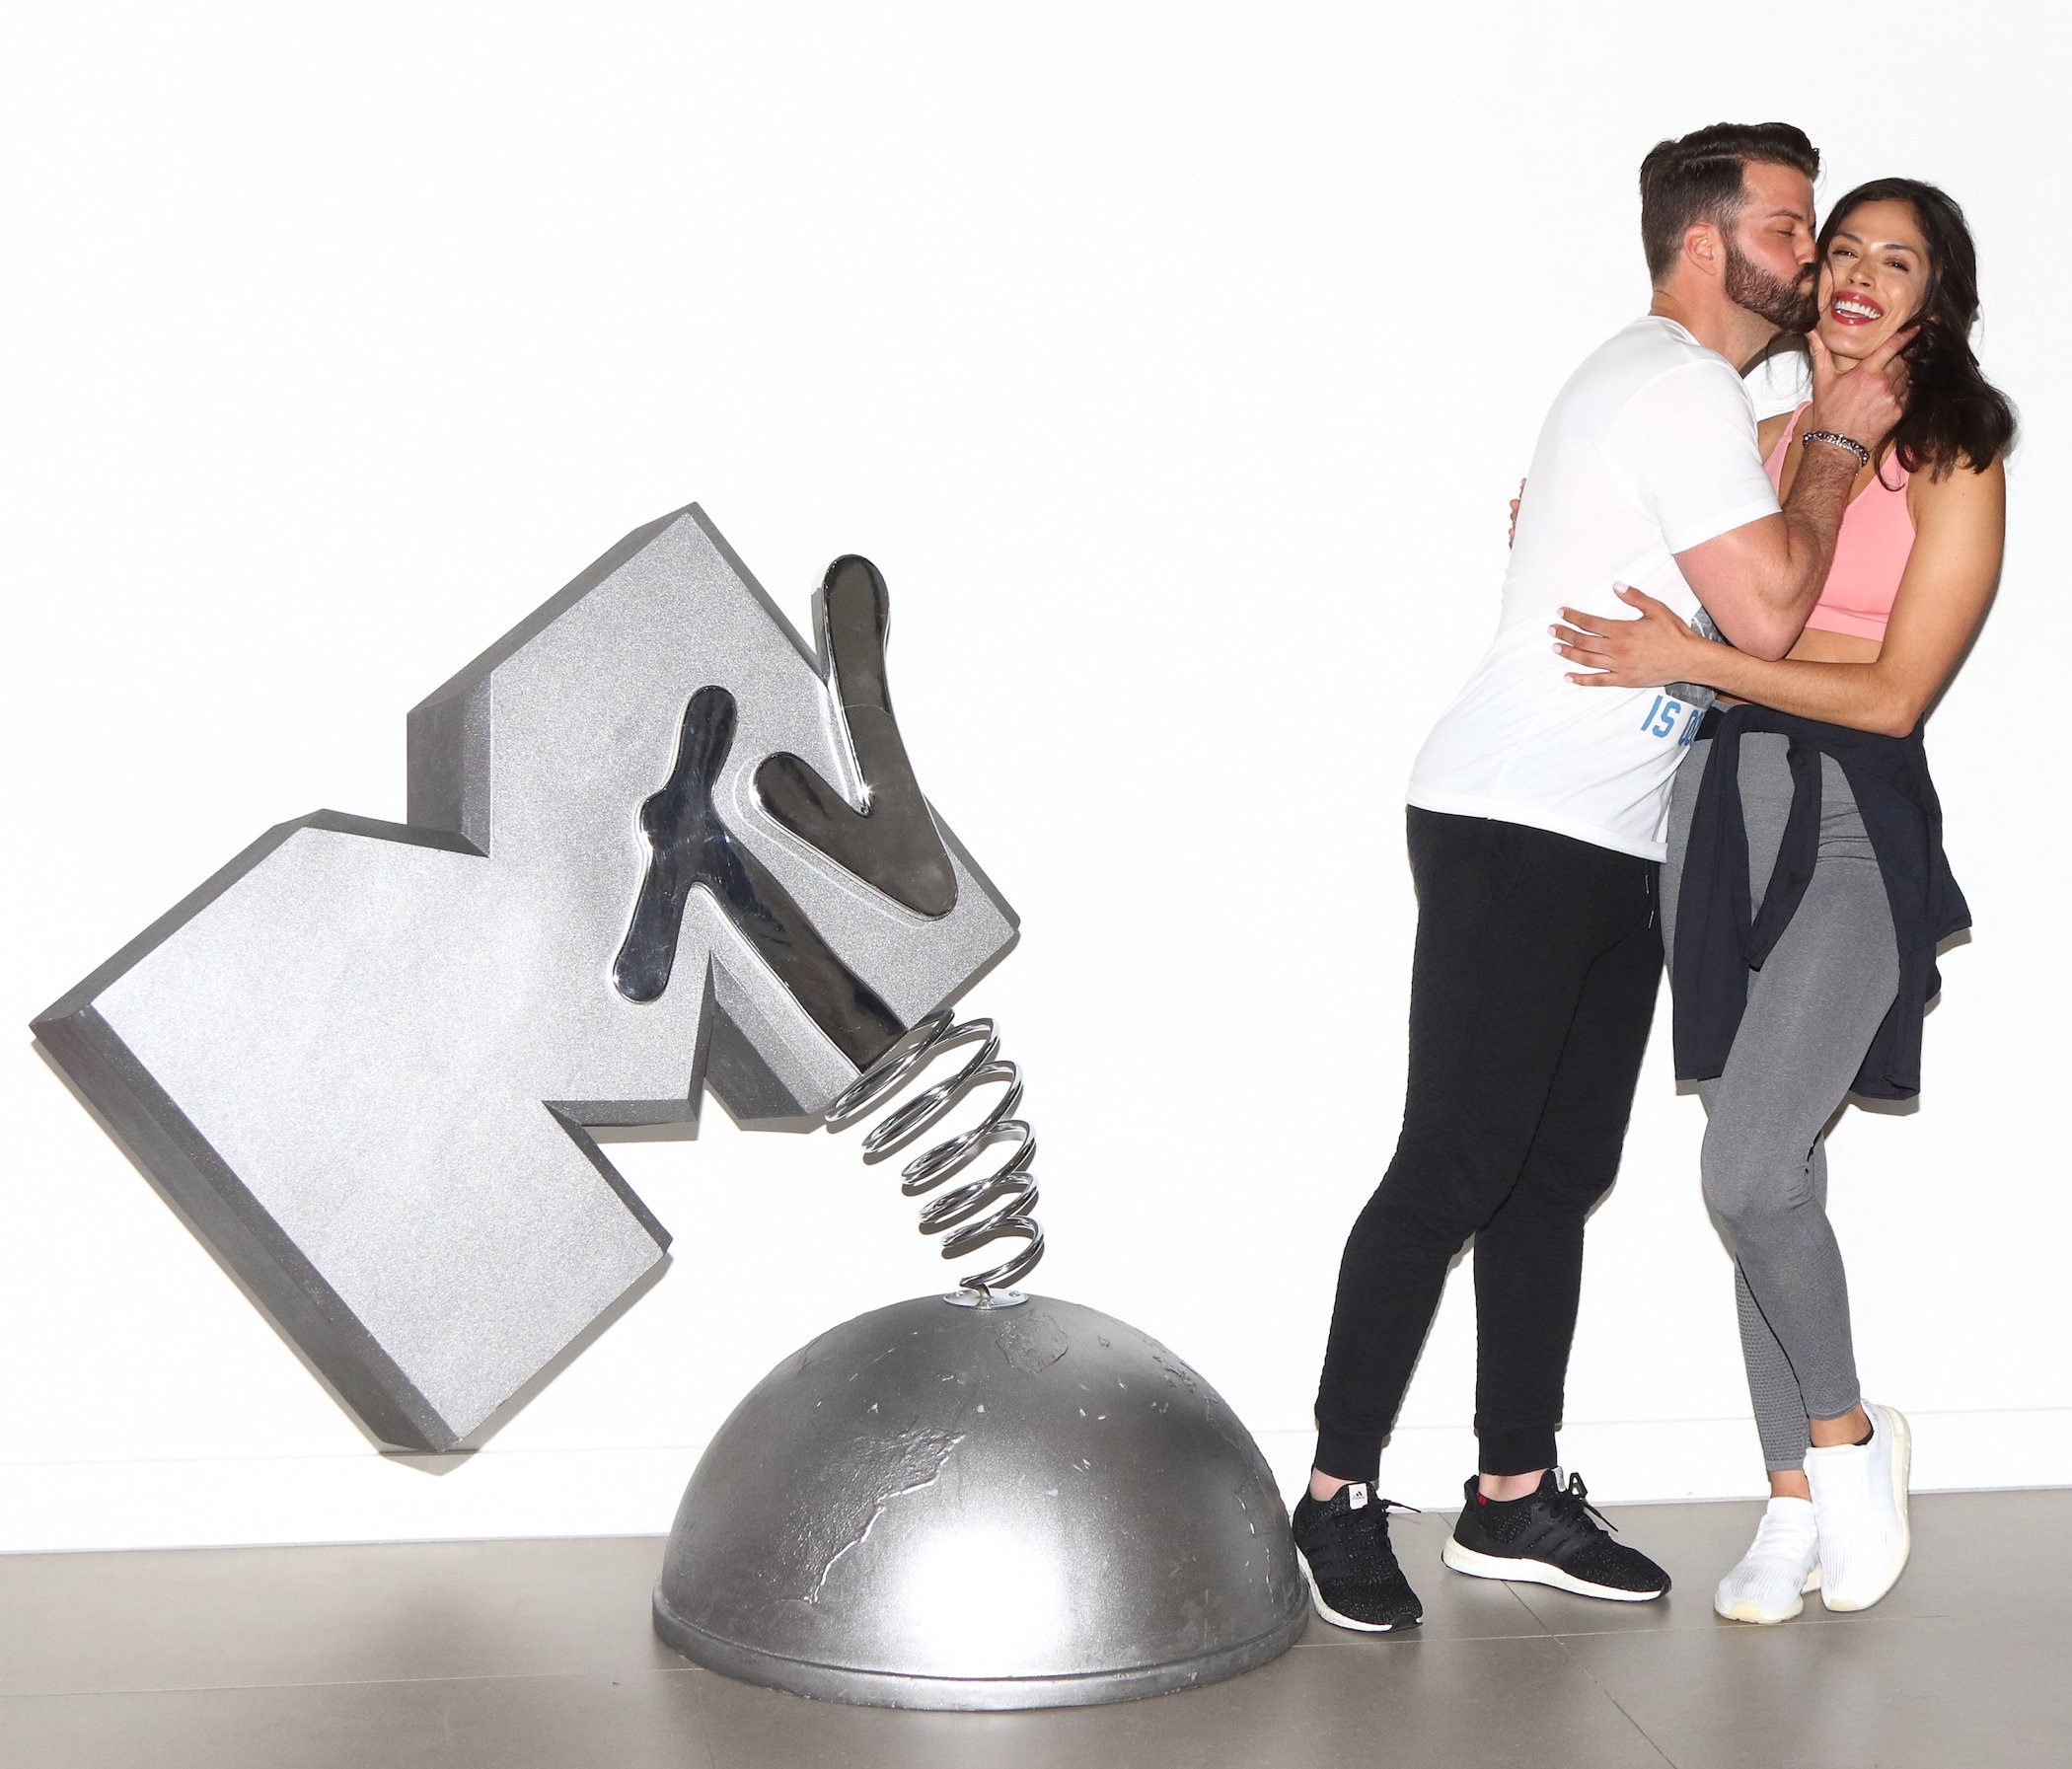 Johnny 'Bananas' Devenanzio and Nany Gonzalez from MTV 's 'The Challenge' Season 38 hugging each other next to an MTV statue